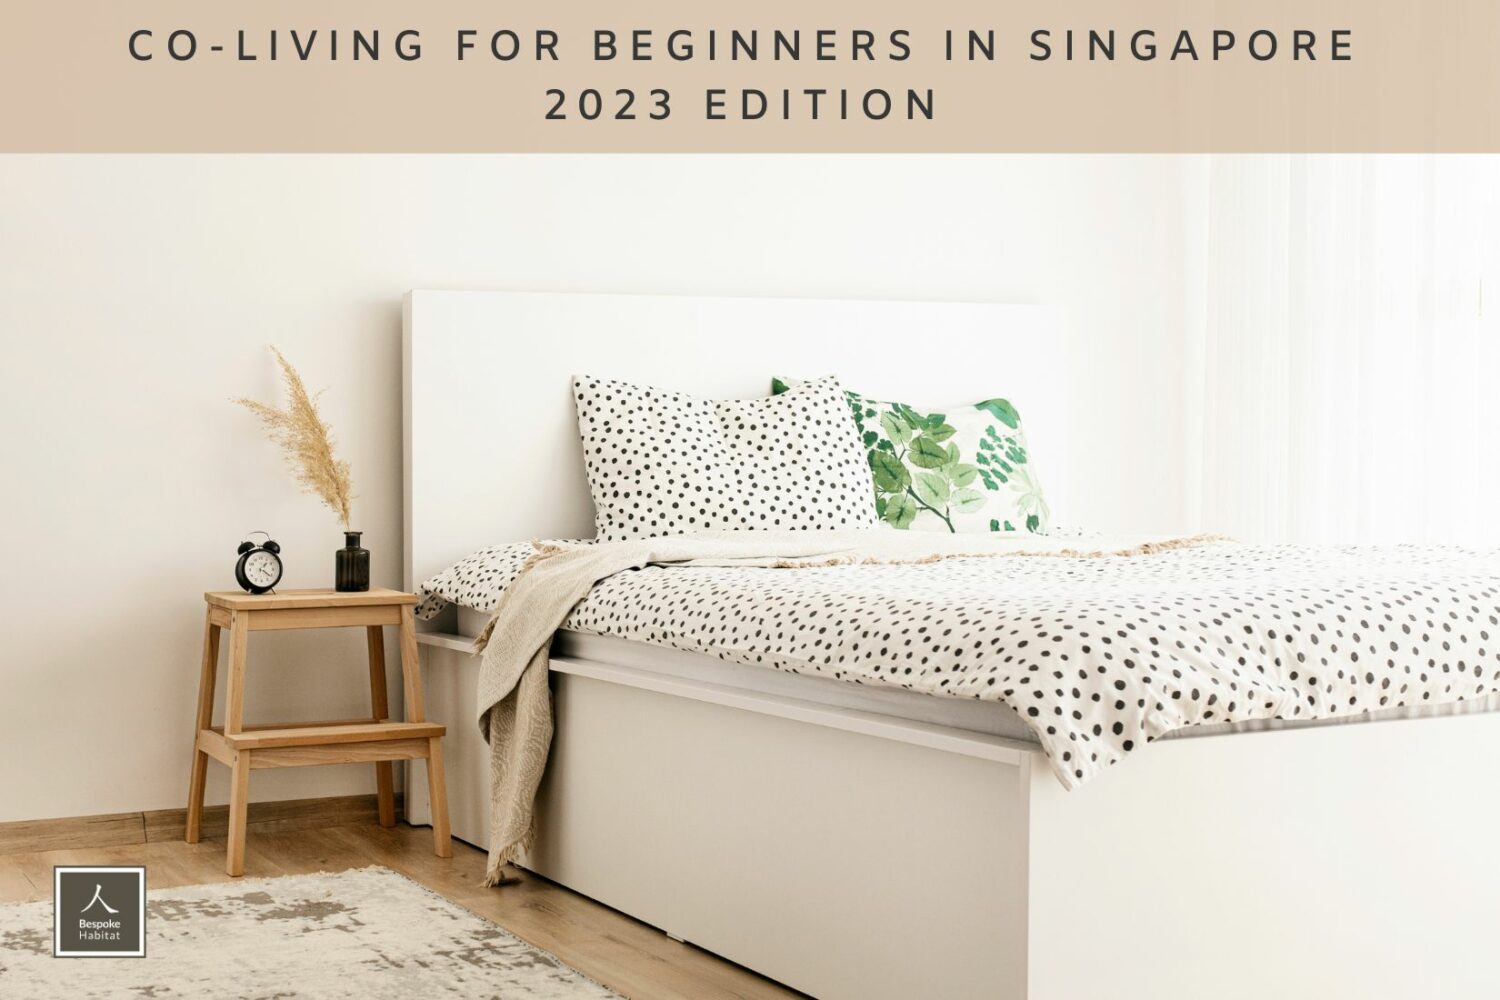 Co-living for Beginners in Singapore 2023 Edition